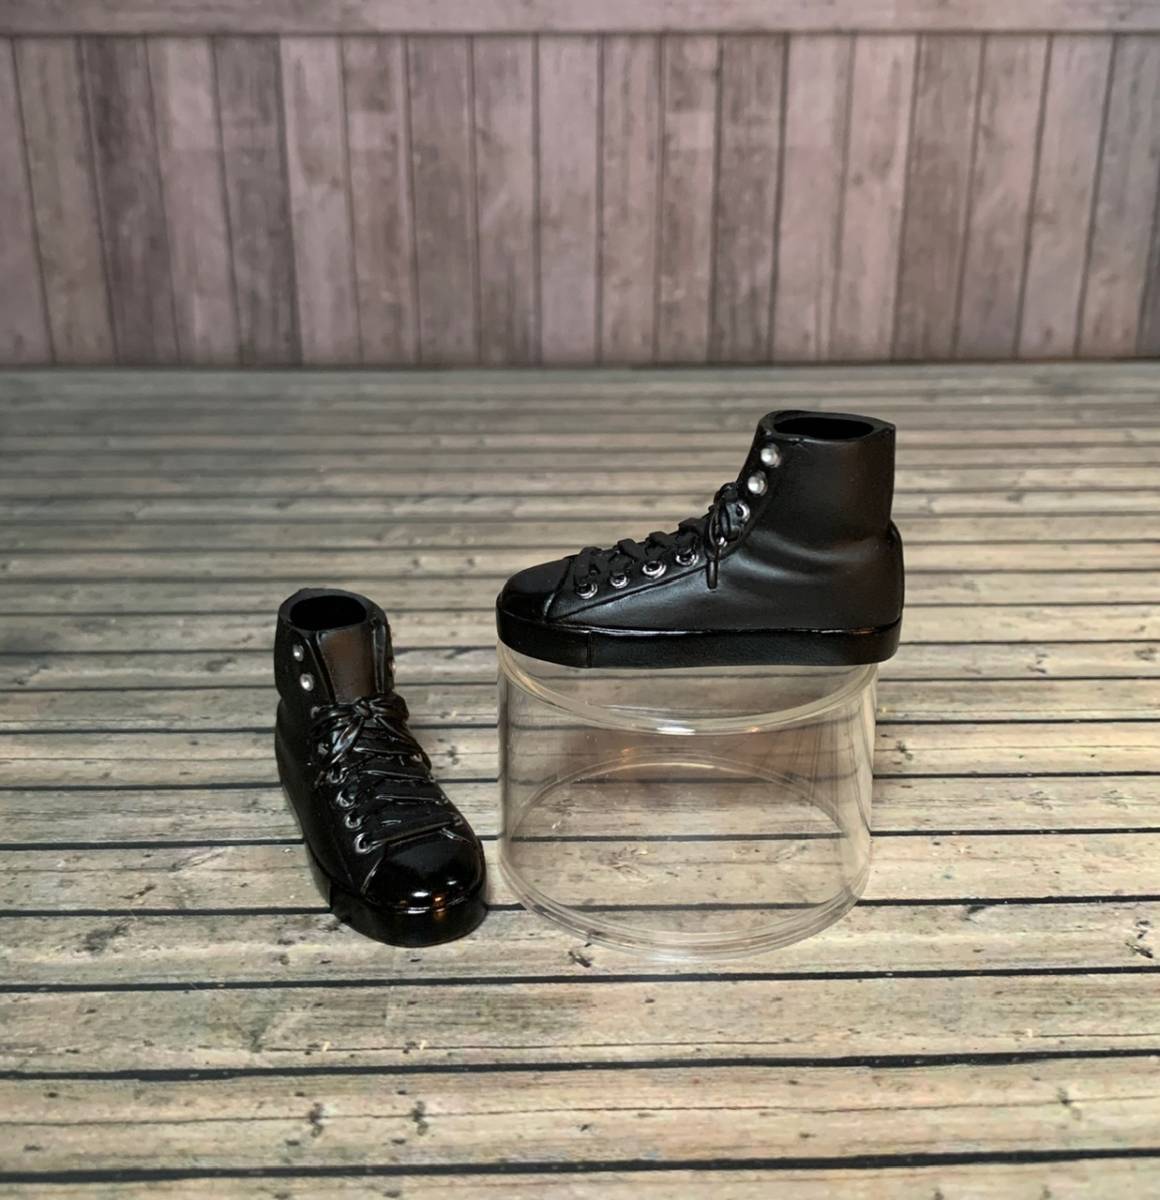 meti com 1/6 Converse manner is ikatto sneakers black empty . type doll for shoes hot toys 